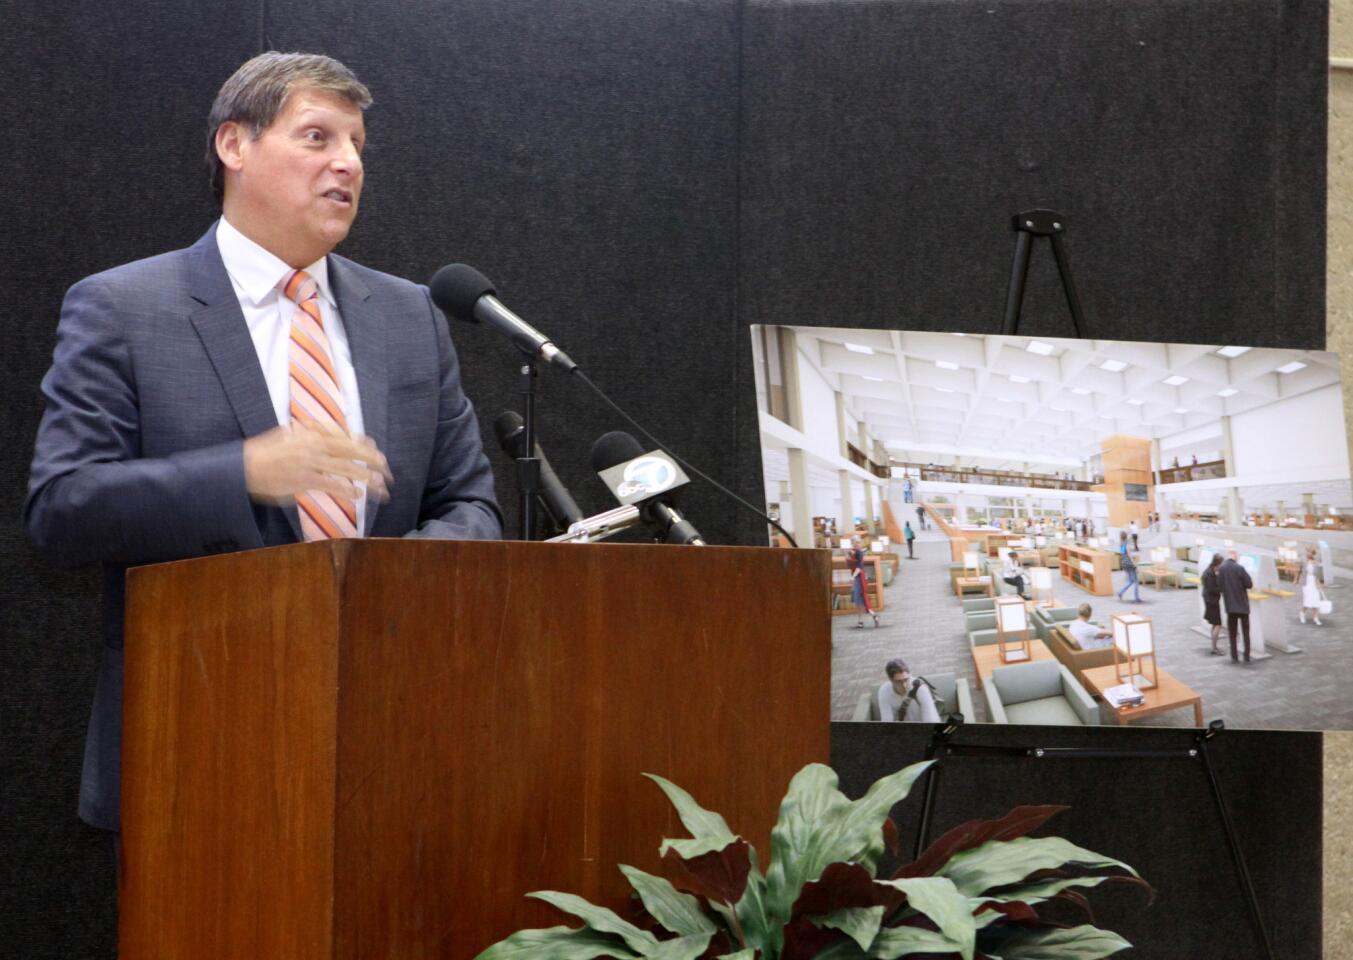 City of Glendale mayor Ara Najarian talks about the renovations that will take place in the next 18 months during the Glendale Central Library renovation groundbreaking ceremony at the library in Glendale on Thursday, July 16, 2015.